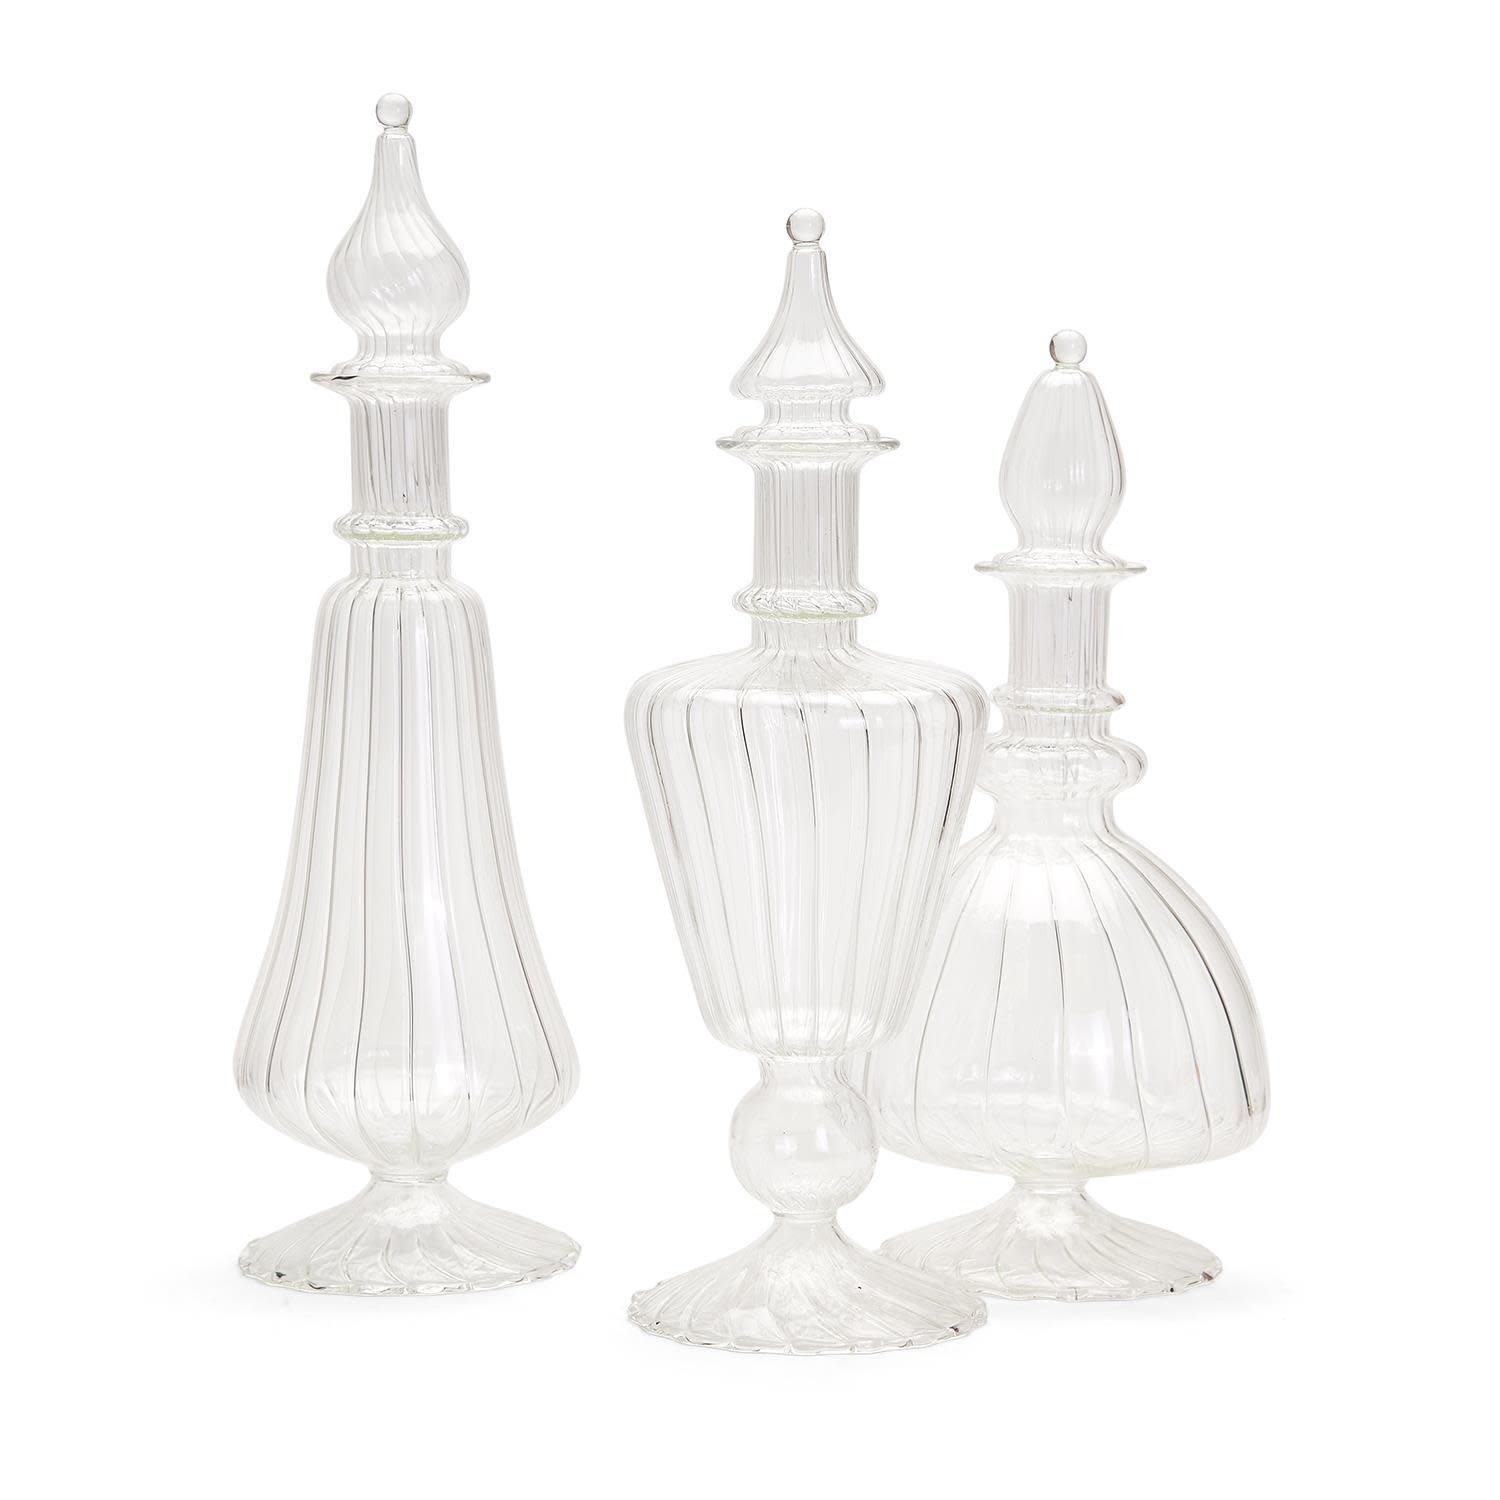 Verre Decanter, Assorted shapes, Priced Individually, available for in store pick up